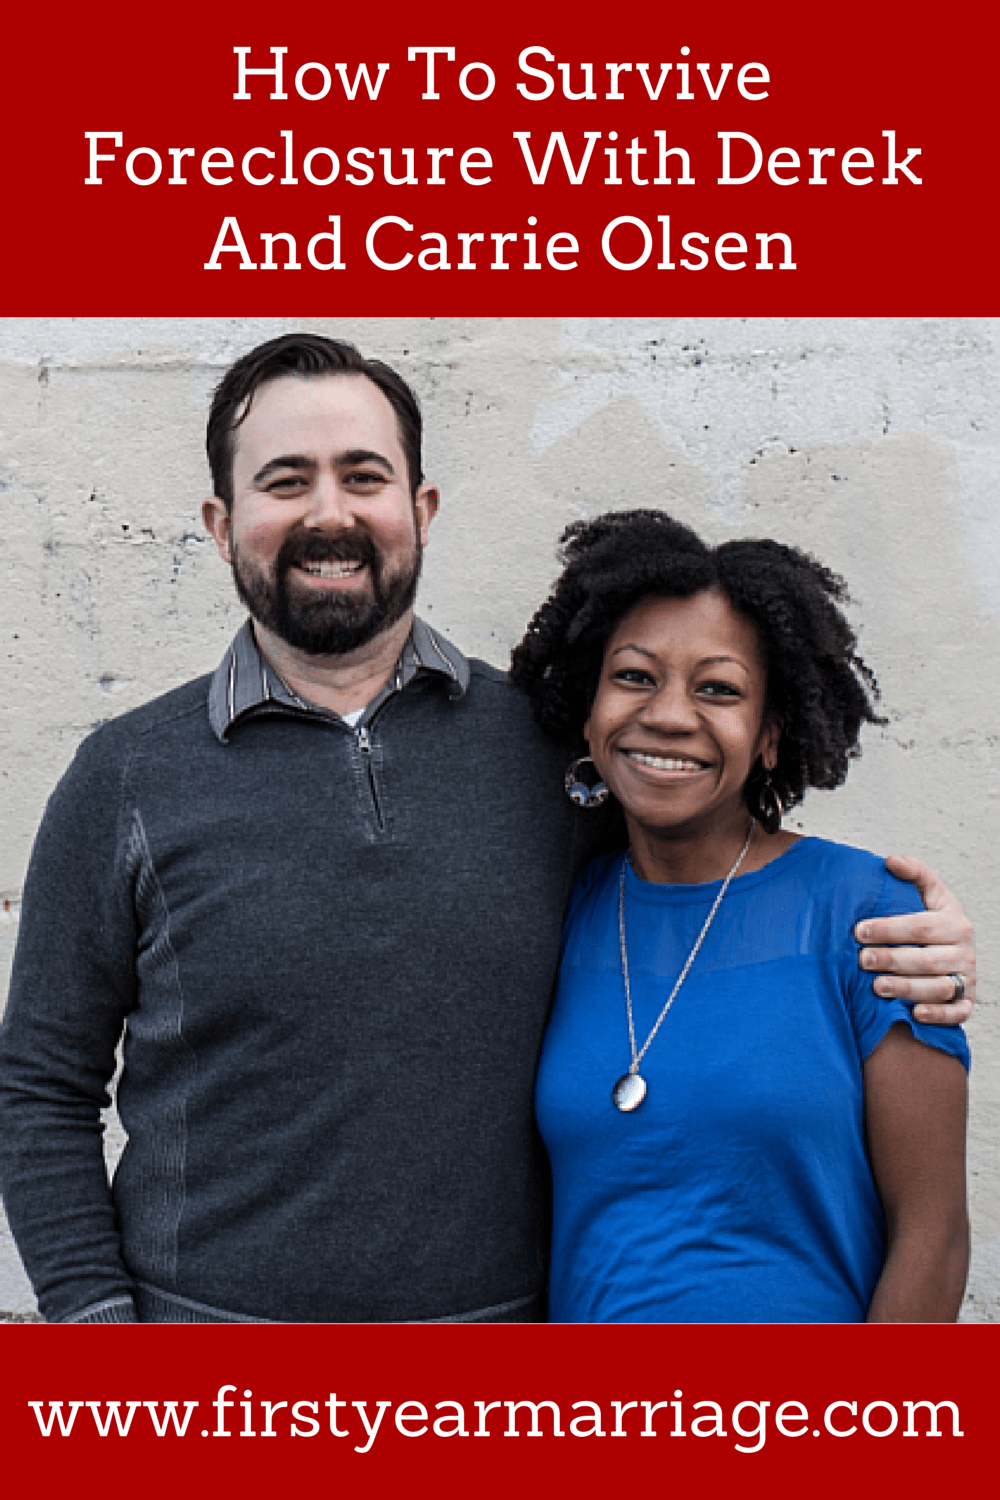 How To Survive Foreclosure With Derek And Carrie Olsen